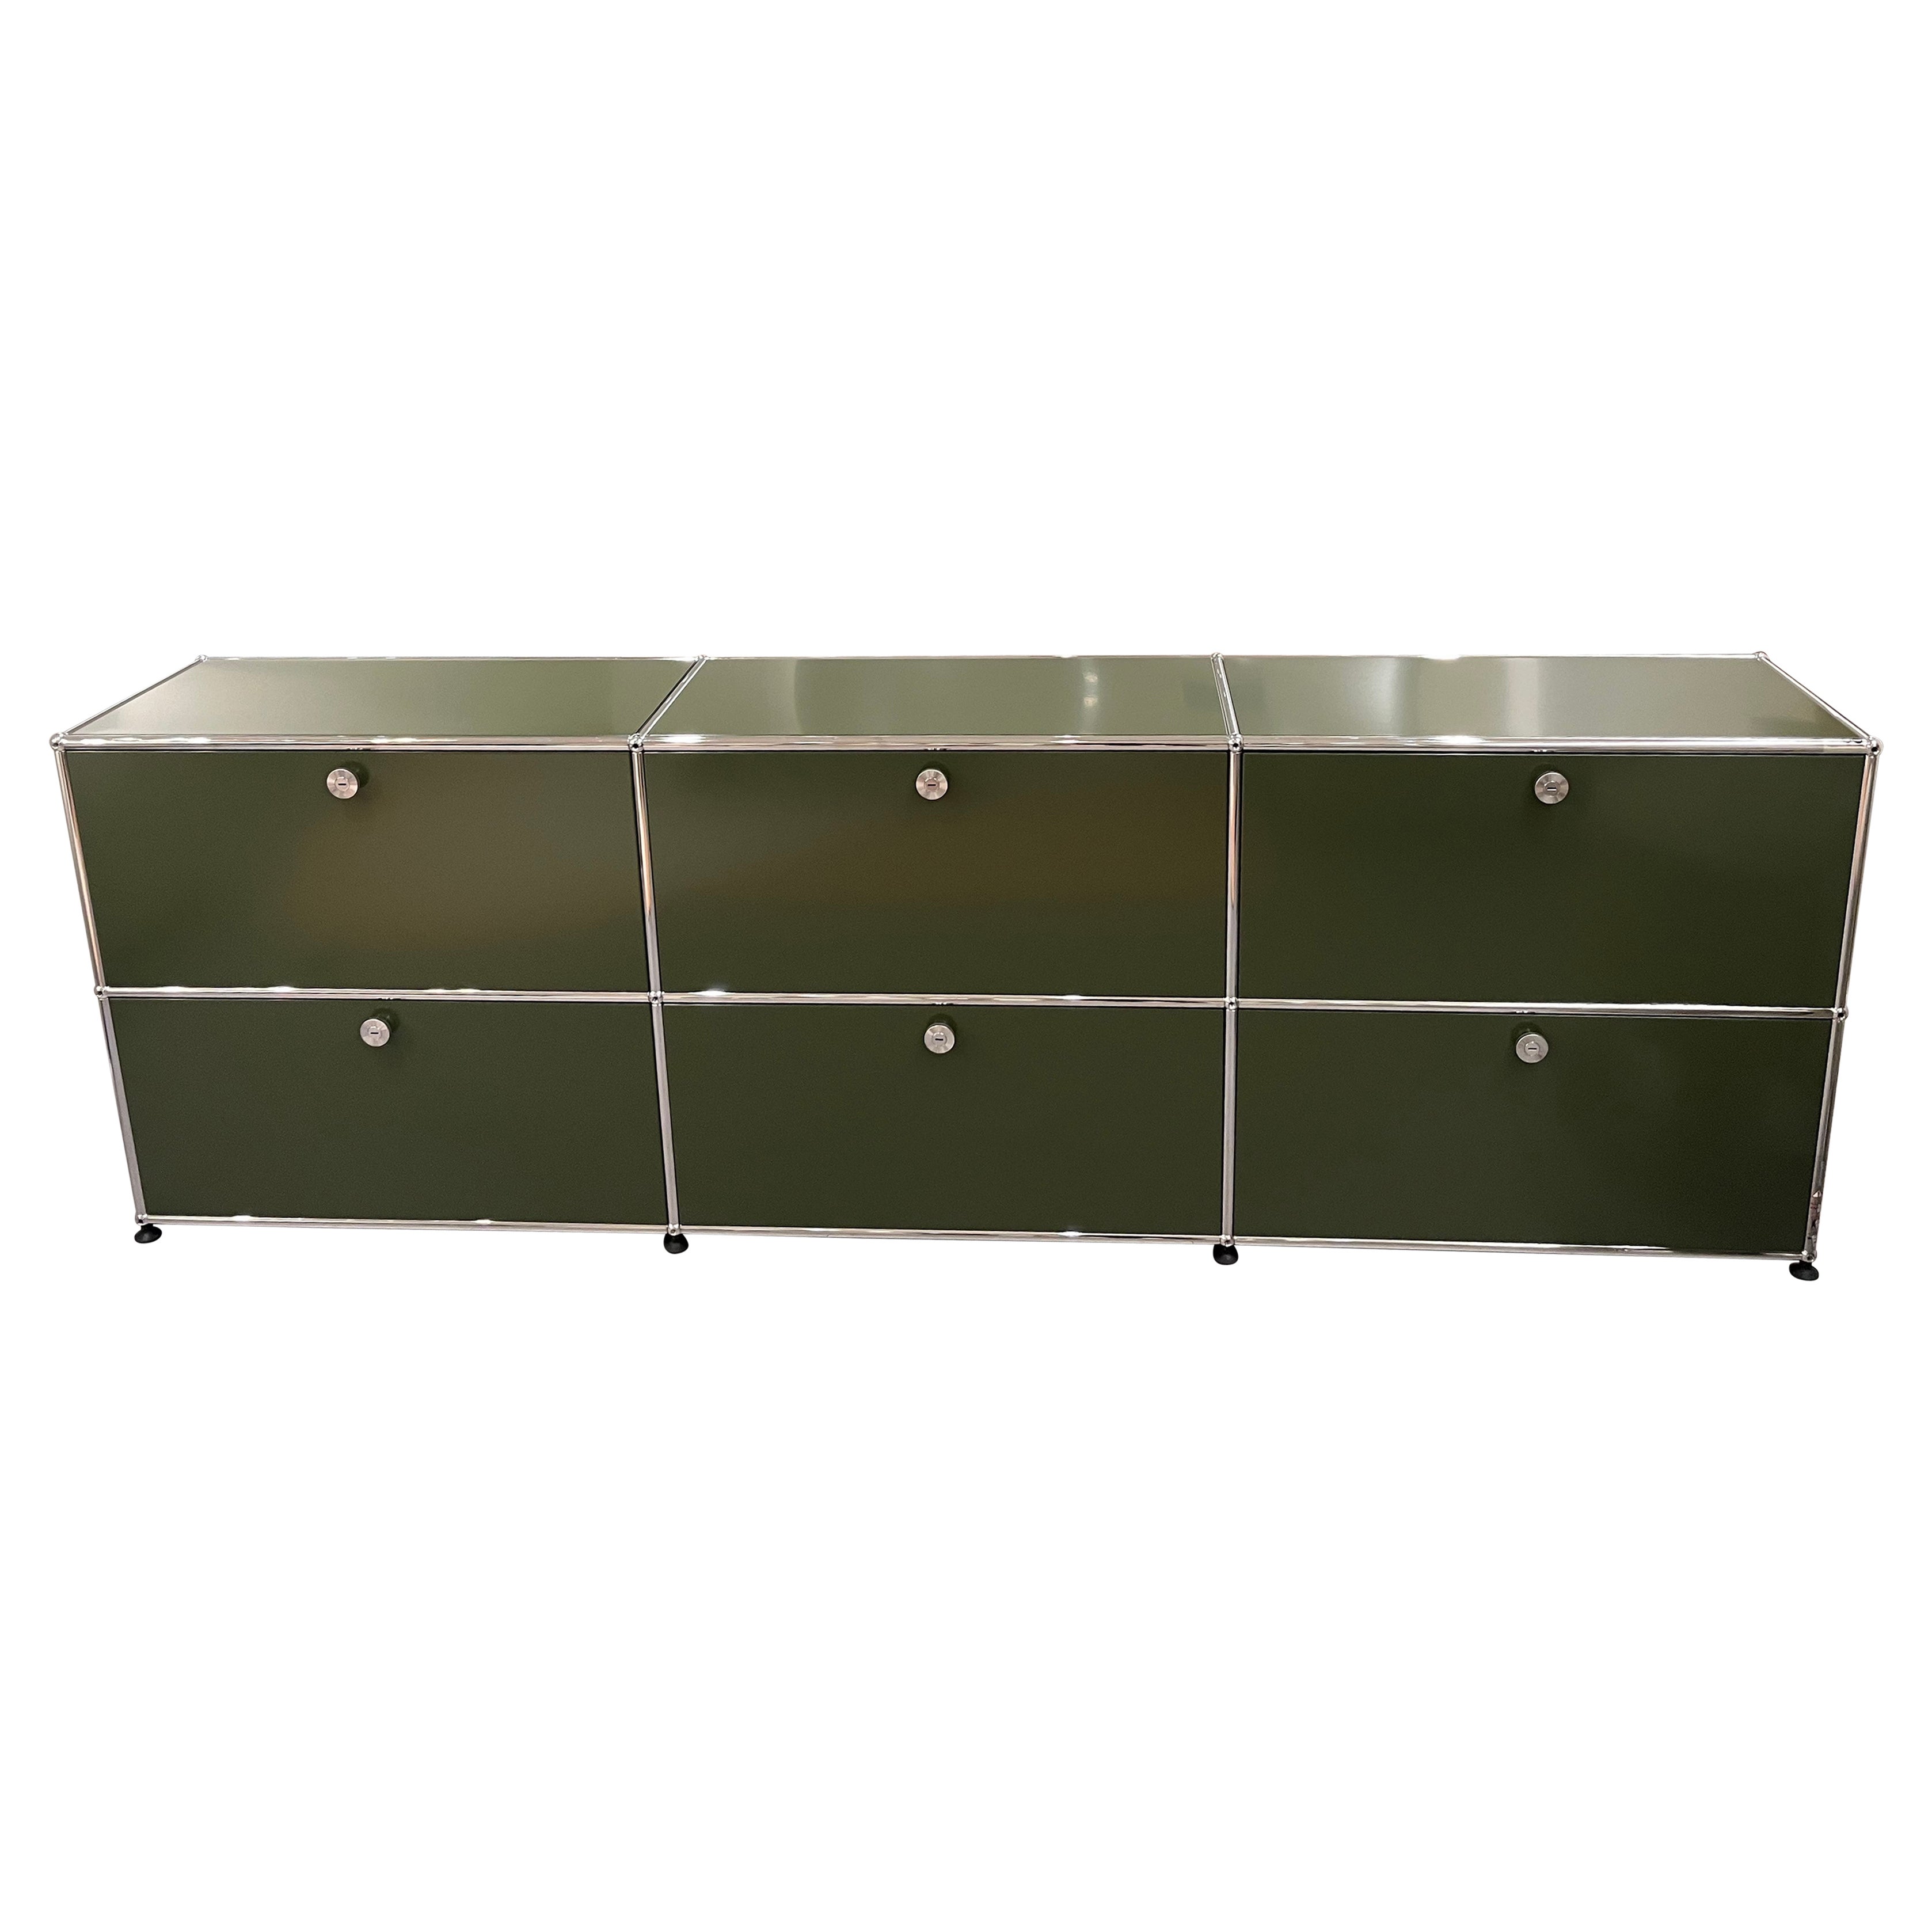 Special Edition USM Haller Olive Green Unit in STOCK For Sale